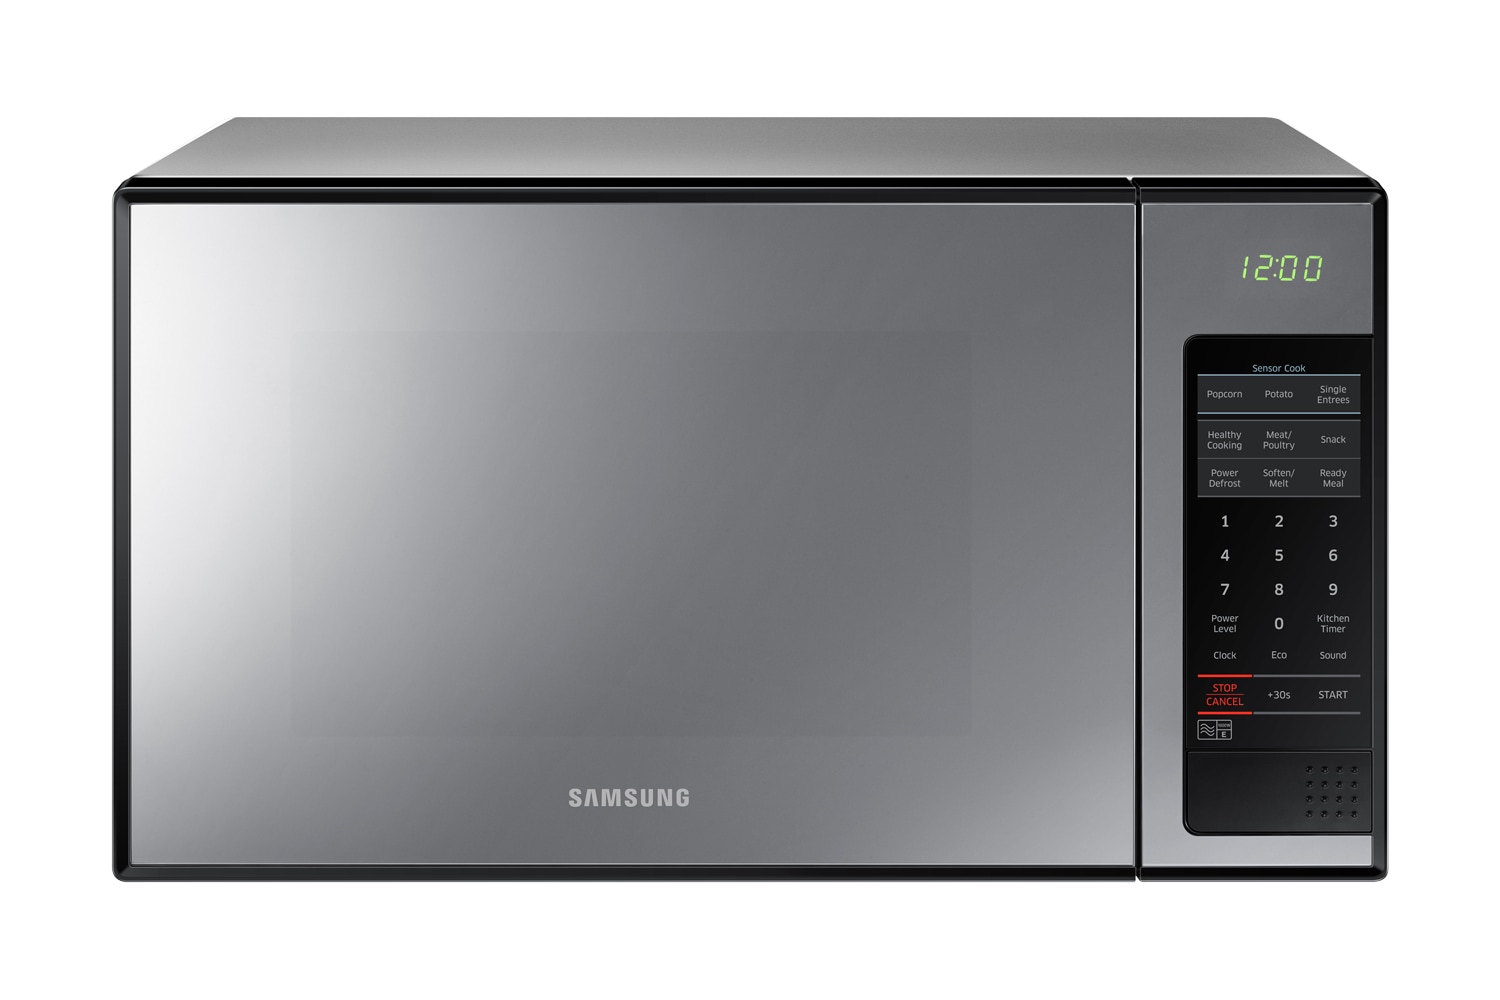 Samsung 32L, Electronic Solo, Microwave Oven, with Auto Cook, ME0113M1 in Silver